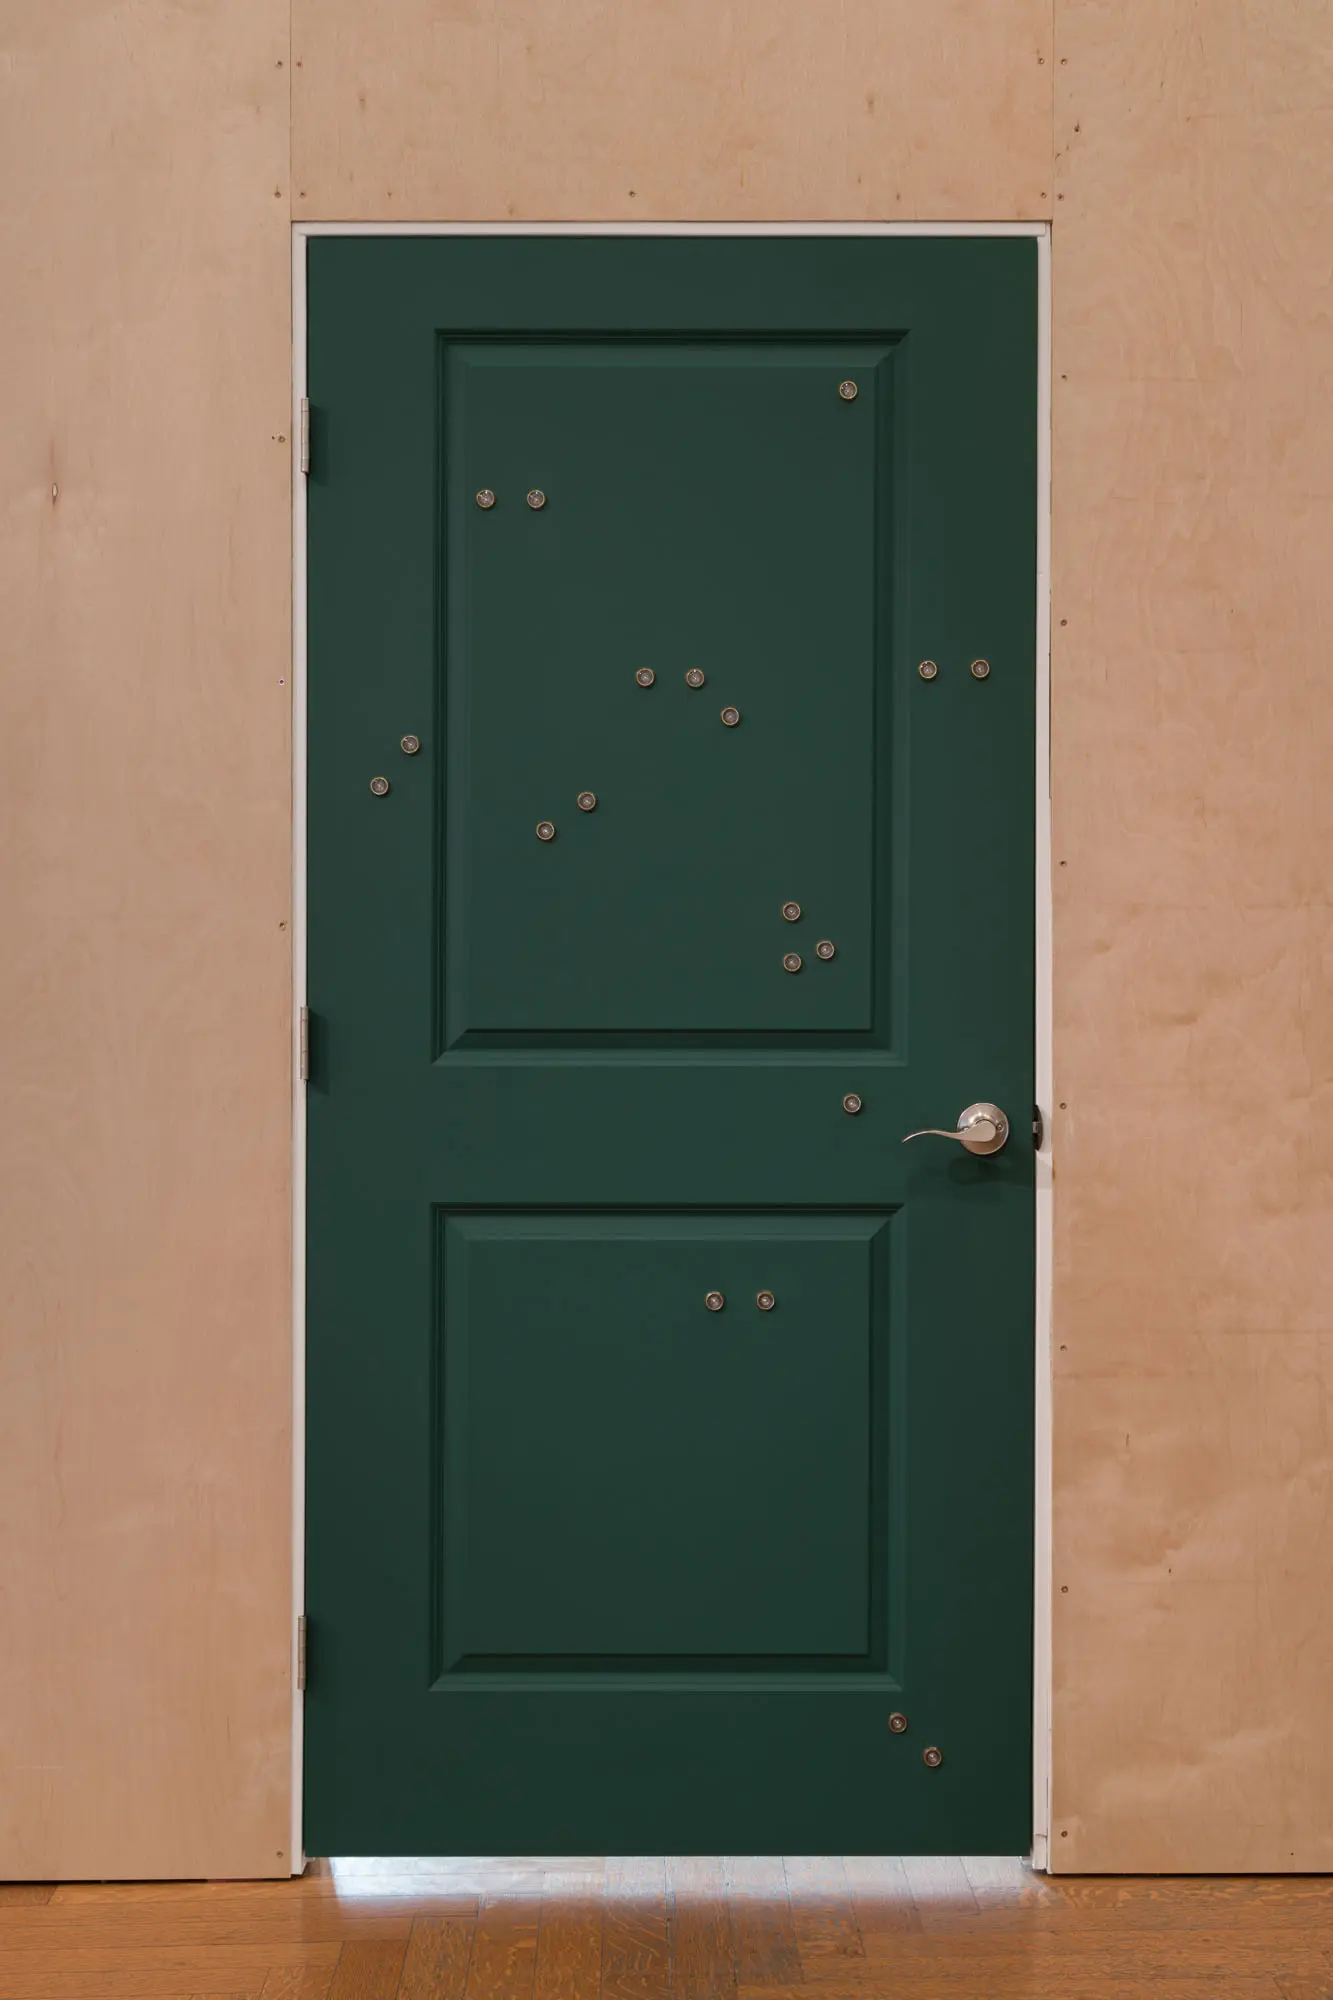 A close-up of a green door with many peepholes at varying heights within a wooden frame.